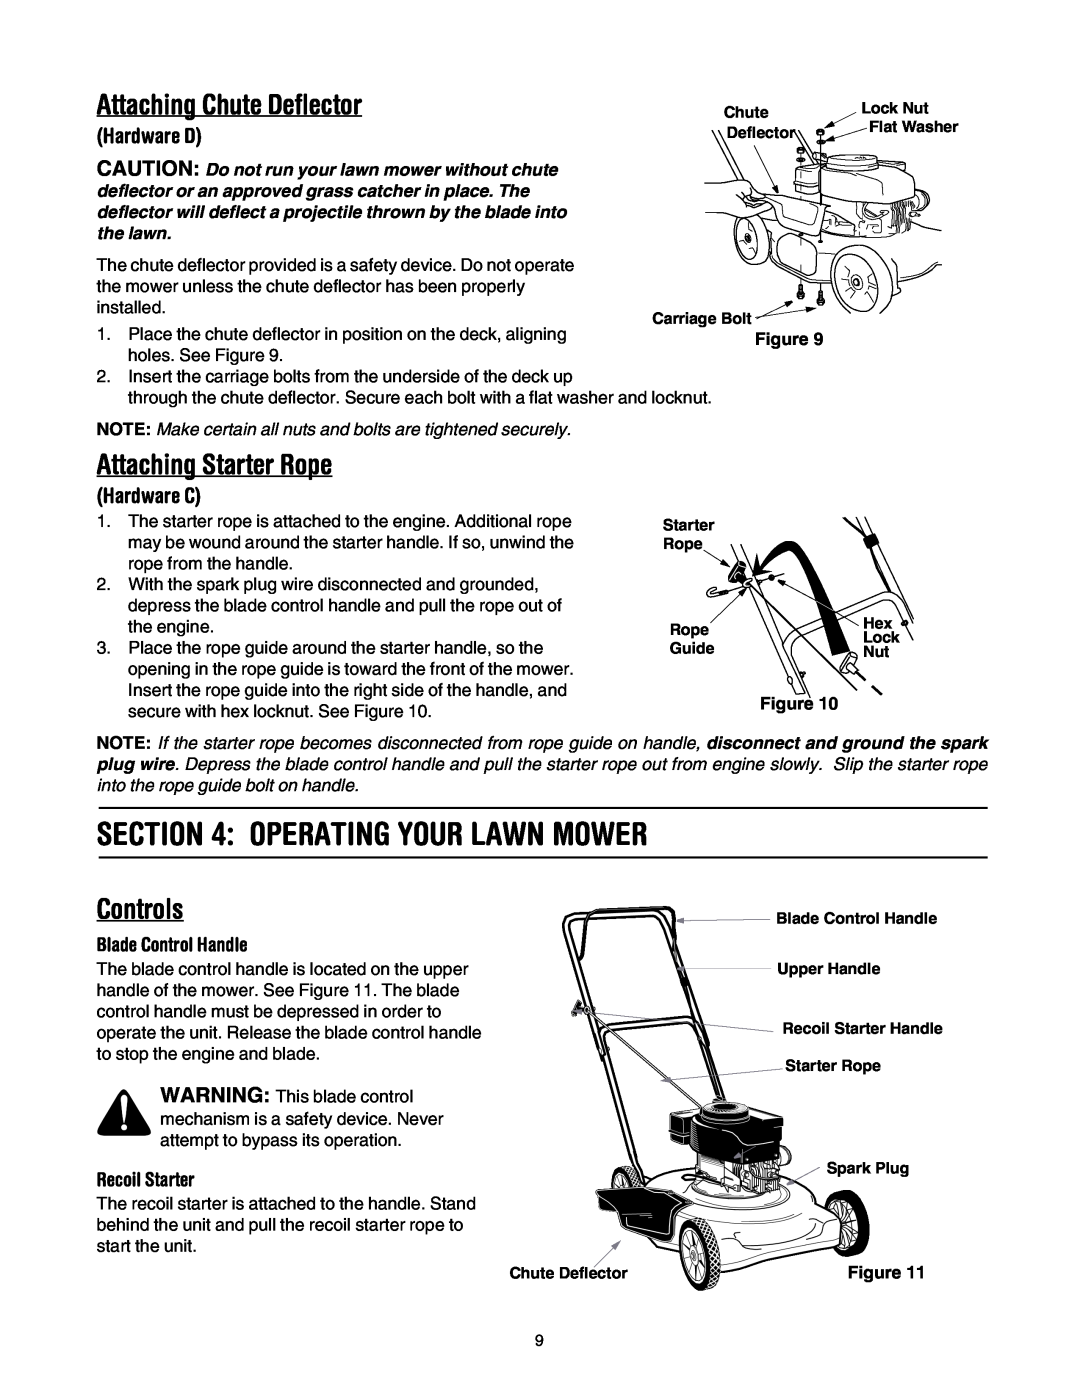 MTD 20 Operating Your Lawn Mower, Attaching Starter Rope, Controls, Hardware D, Hardware C, Blade Control Handle, the lawn 